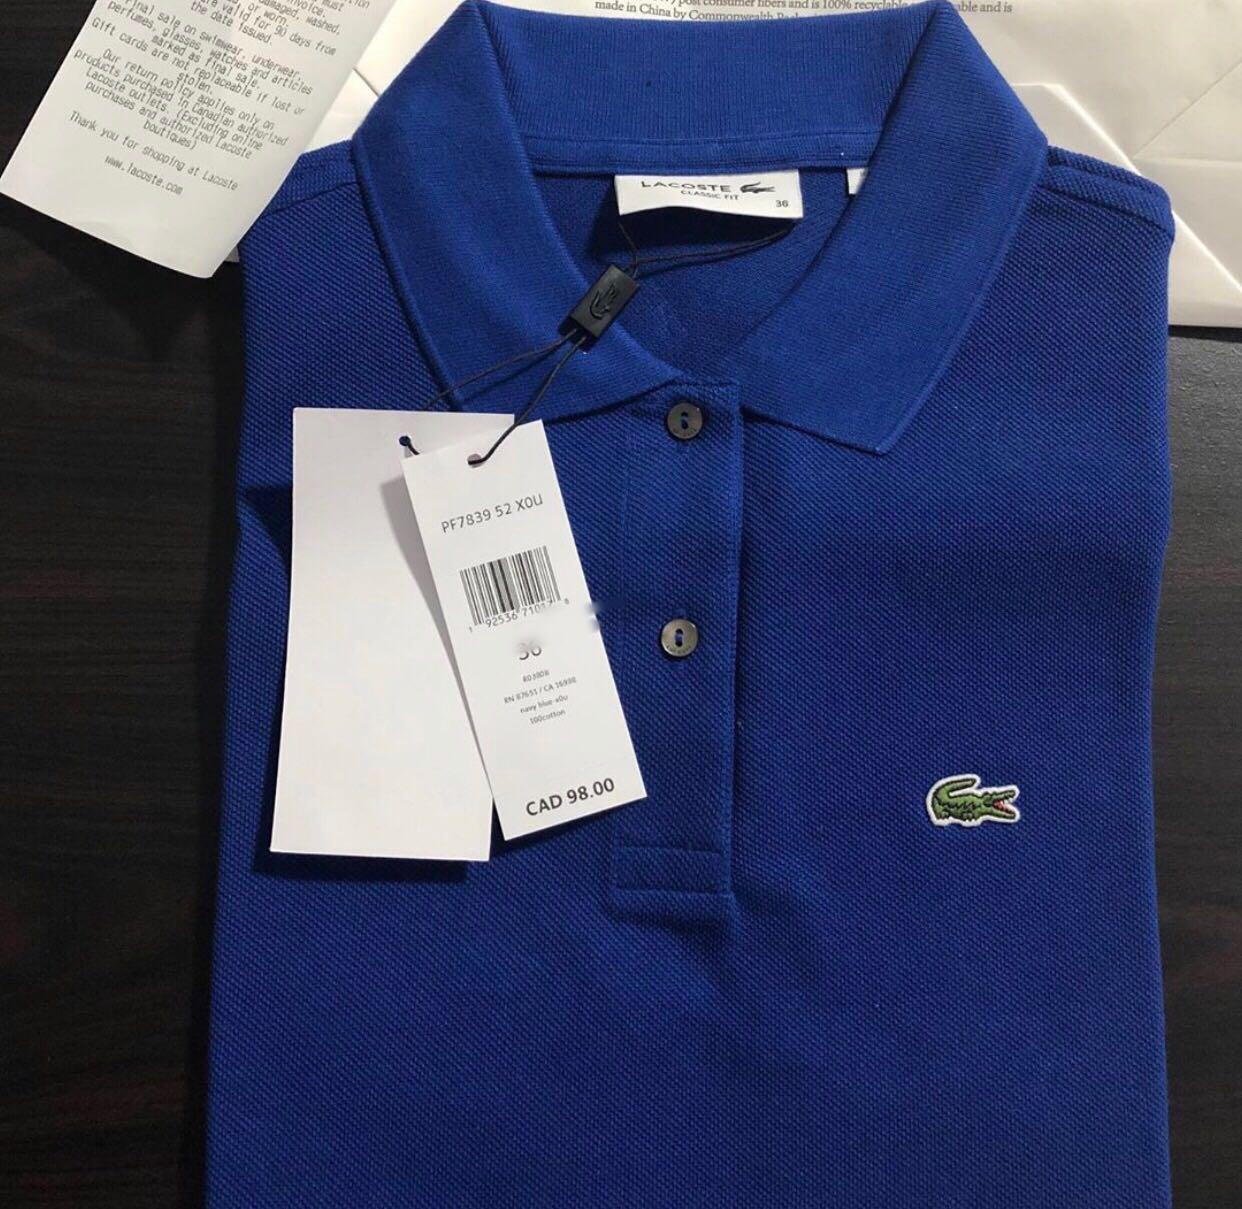 lacoste made in china authentic